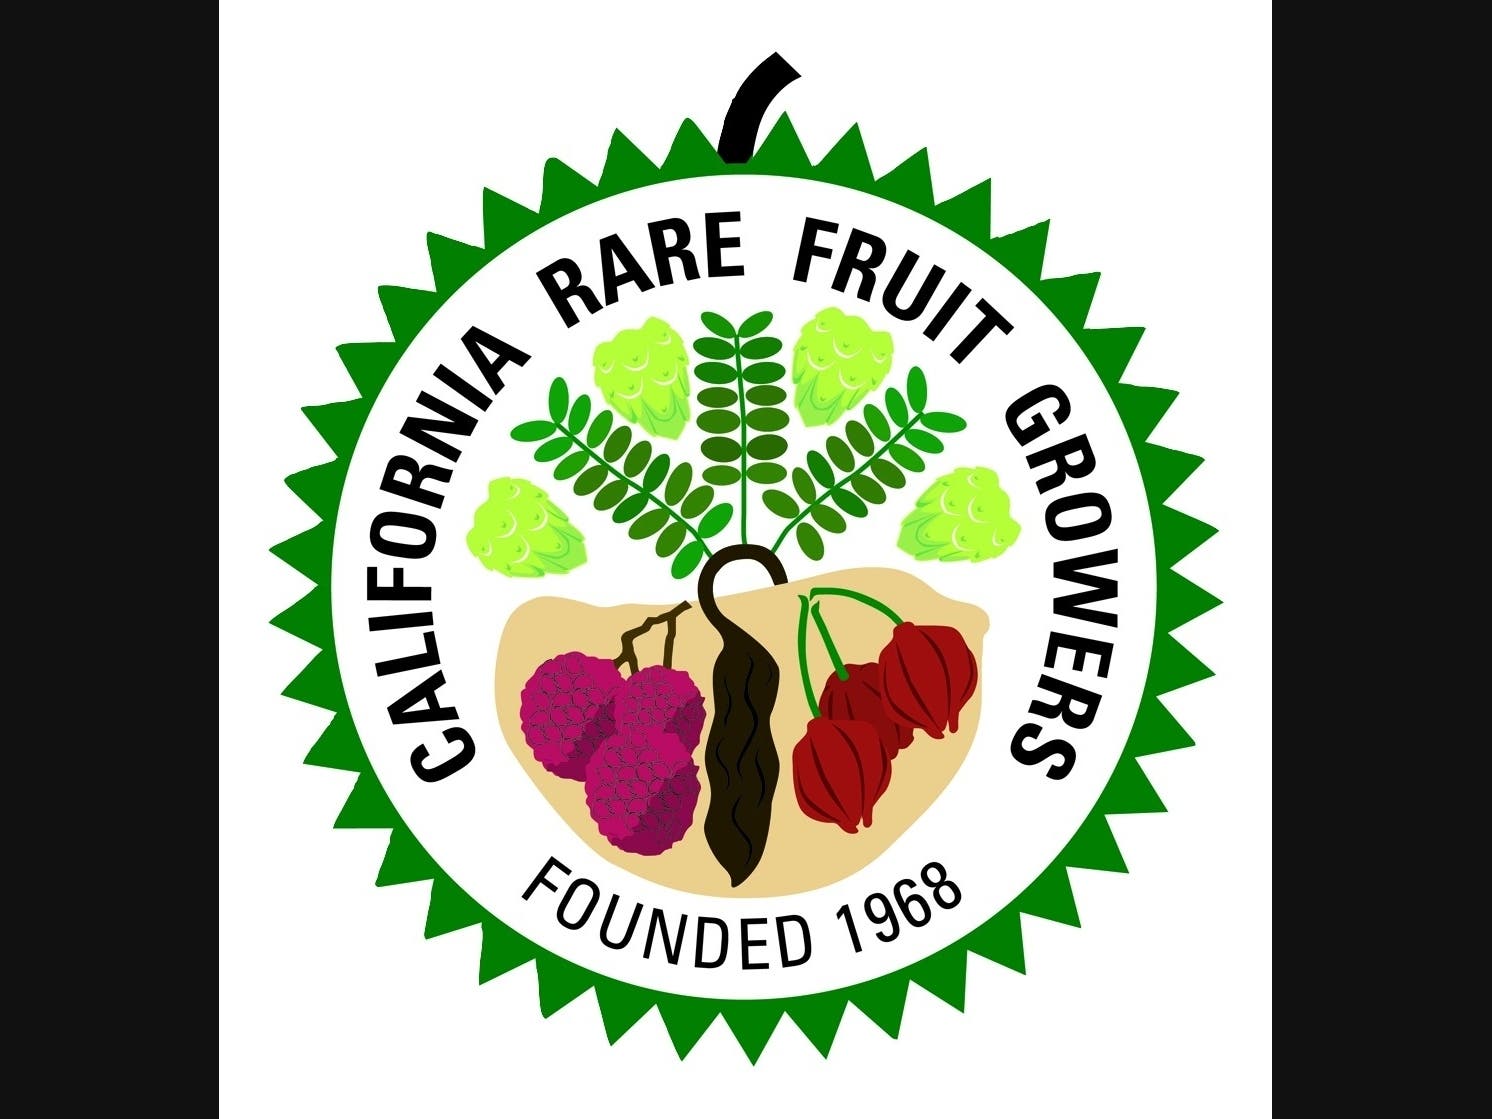 Introducing a horticulture / gardening club Based In Orange County HB